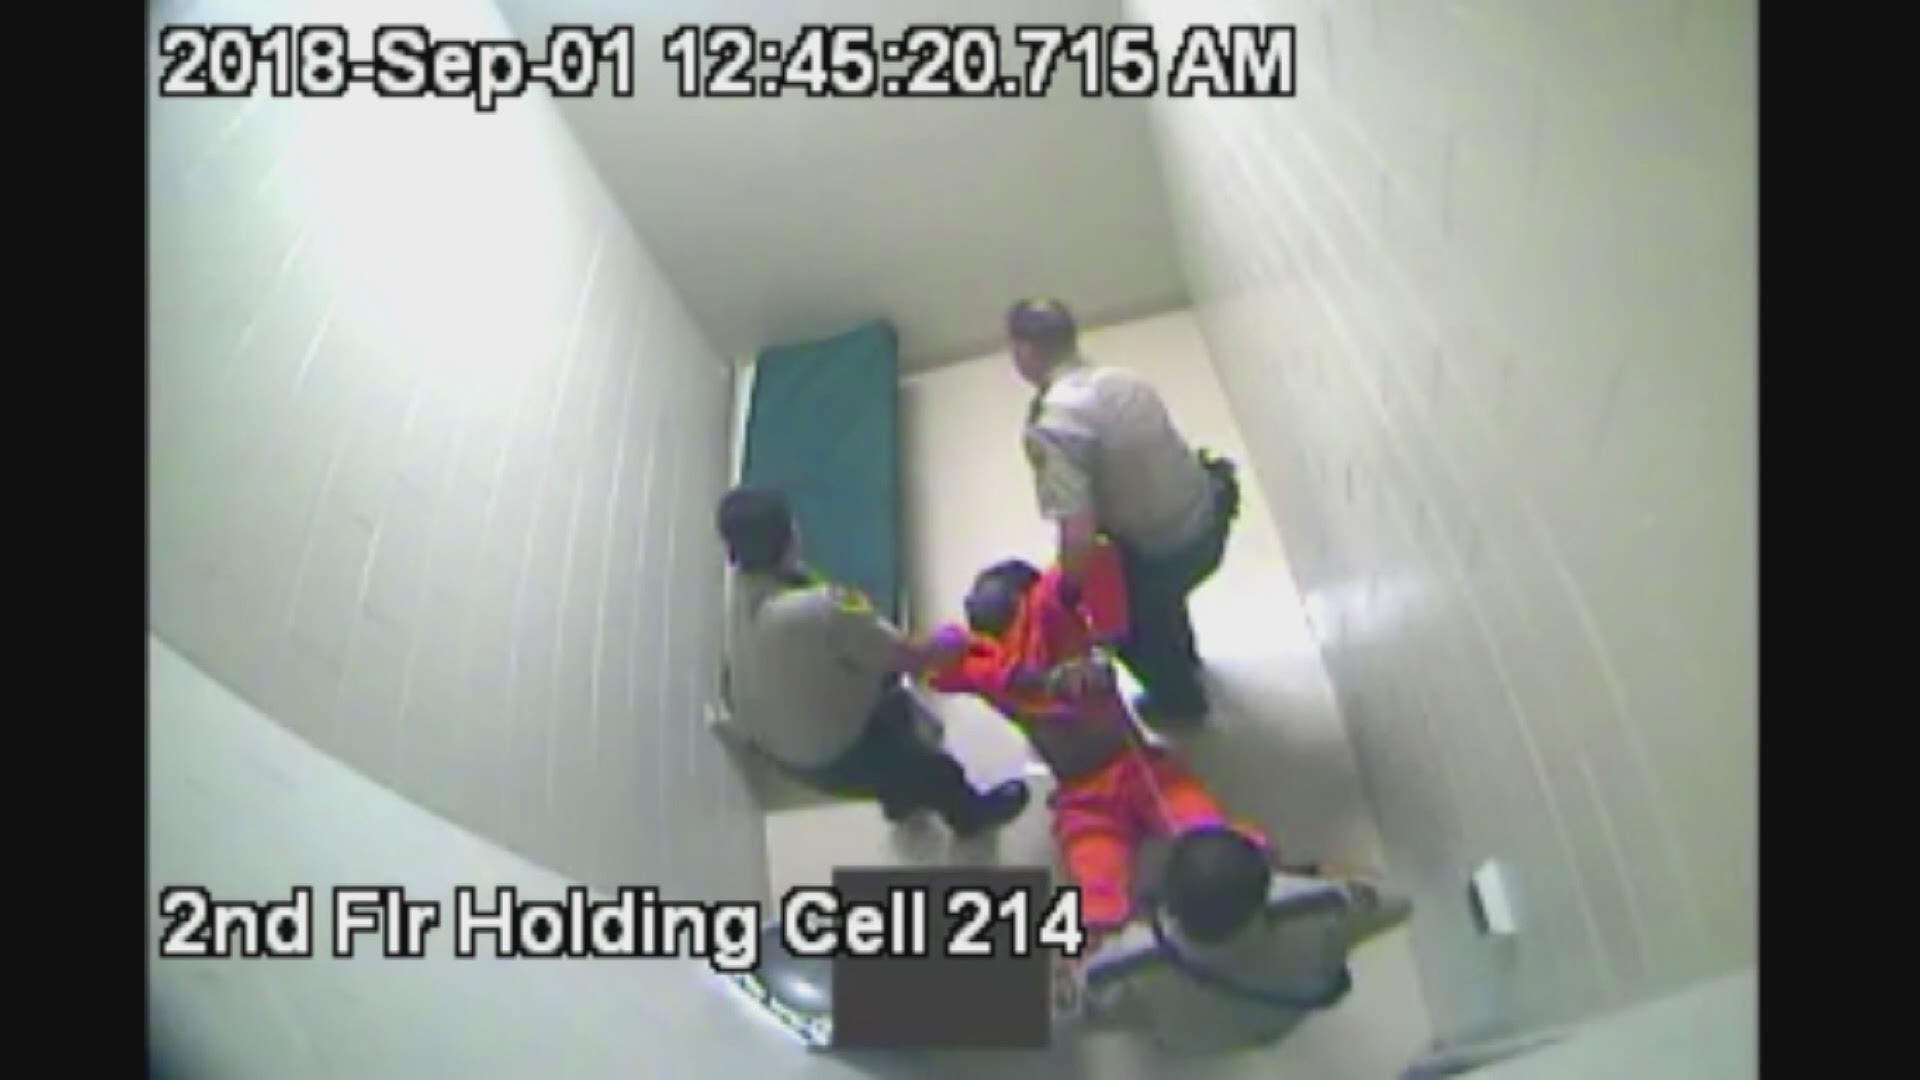 Sept. 1 - Sherrell carried back to his cell